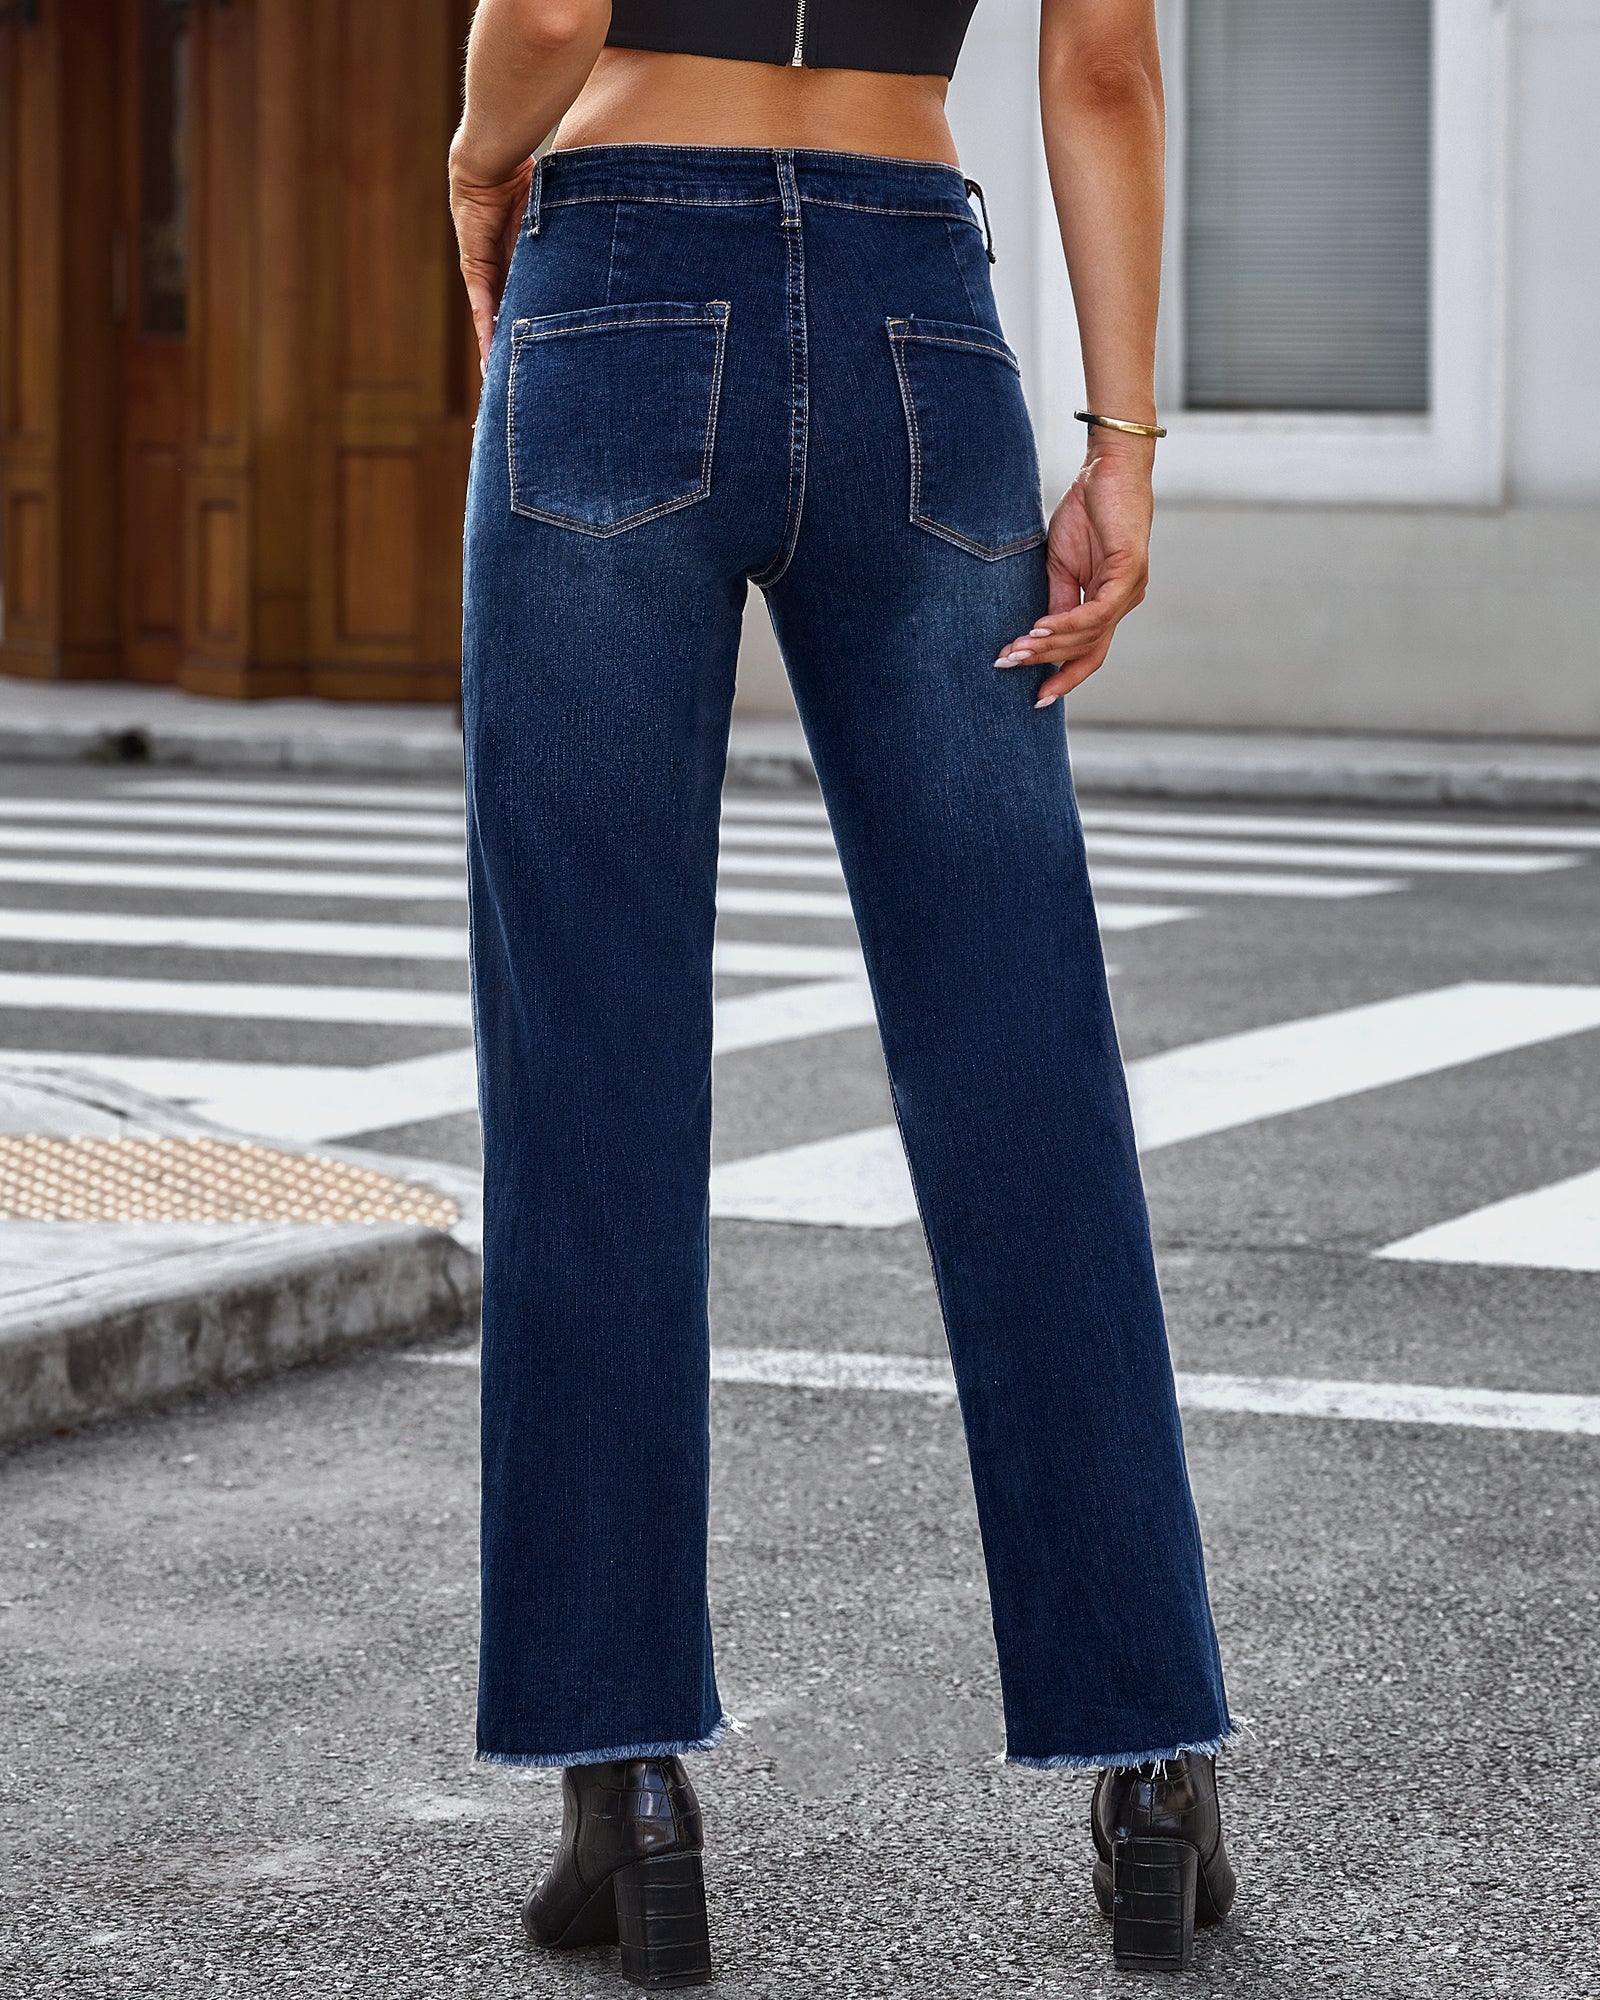 GRAPENT Straight Leg Jeans for Women High Waisted Stretchy Frayed